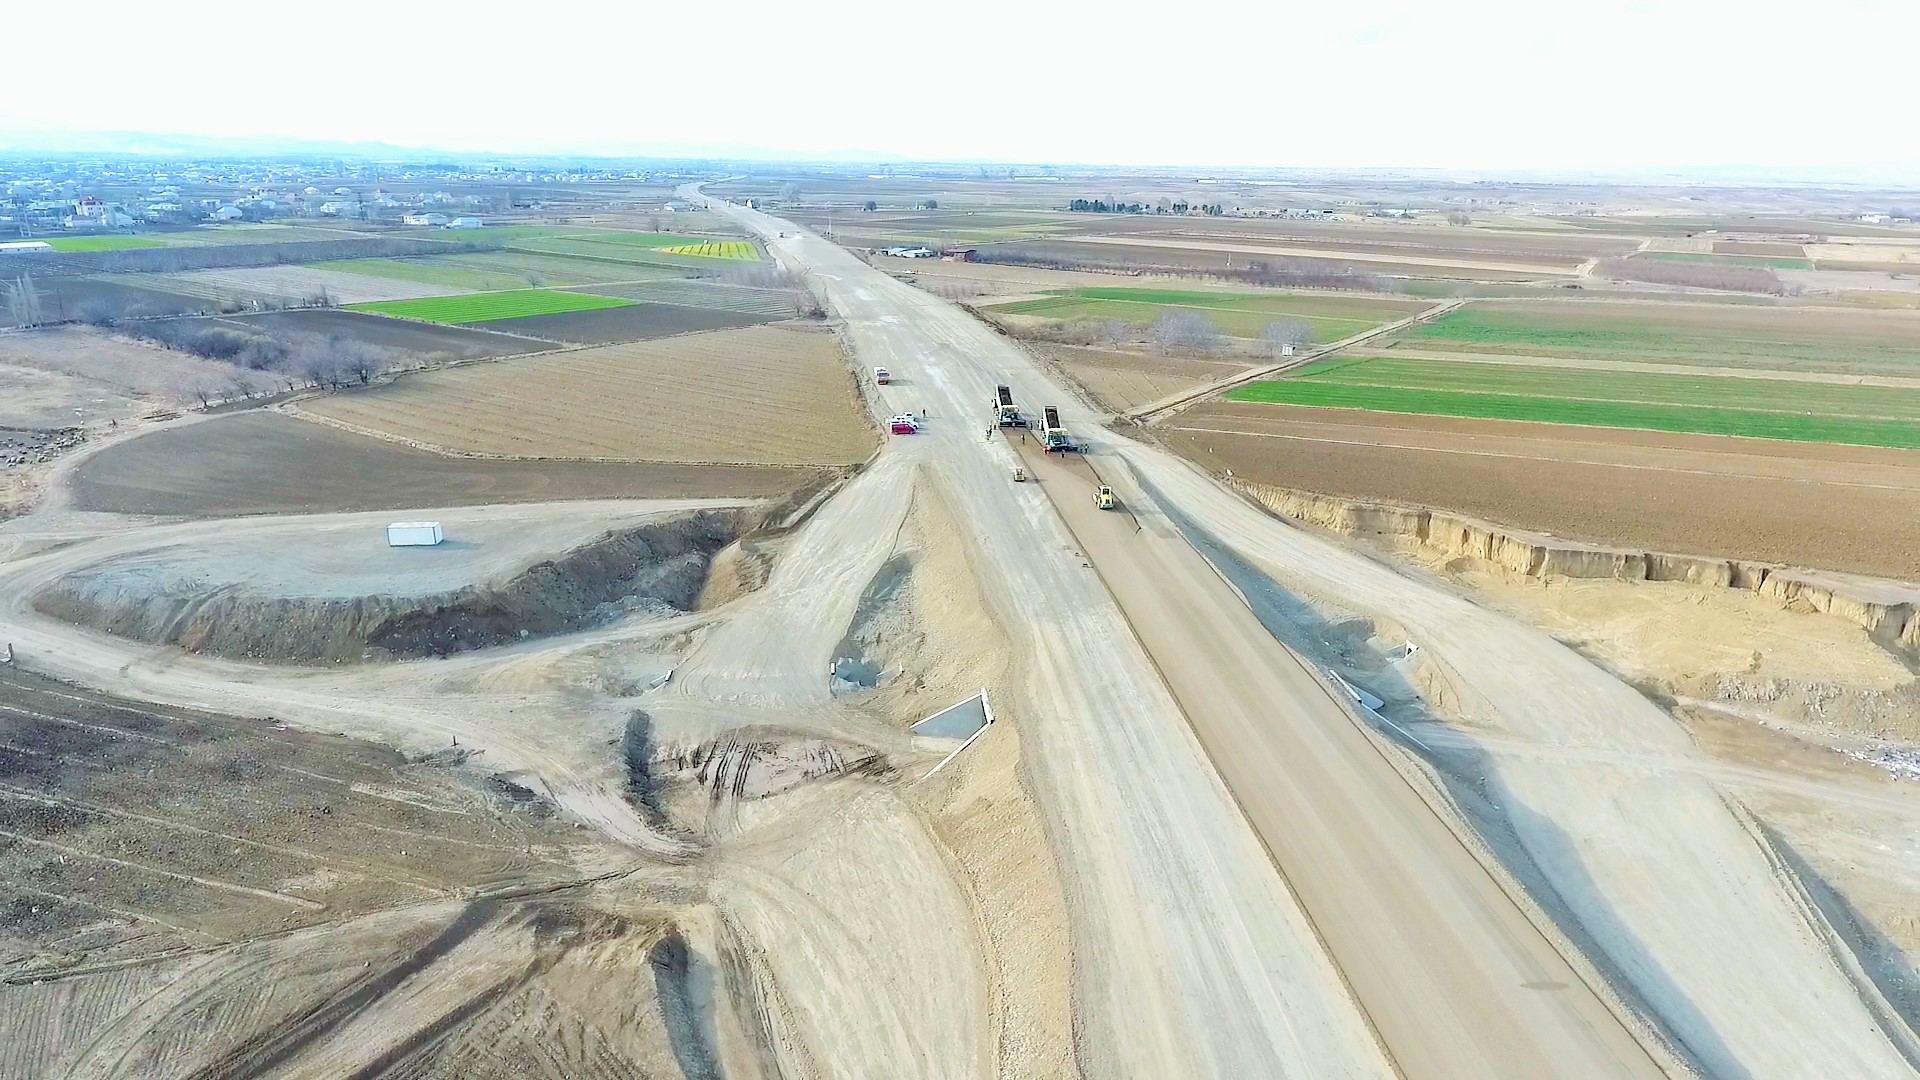 One of sections of Baku-Georgia highway improved (PHOTO)